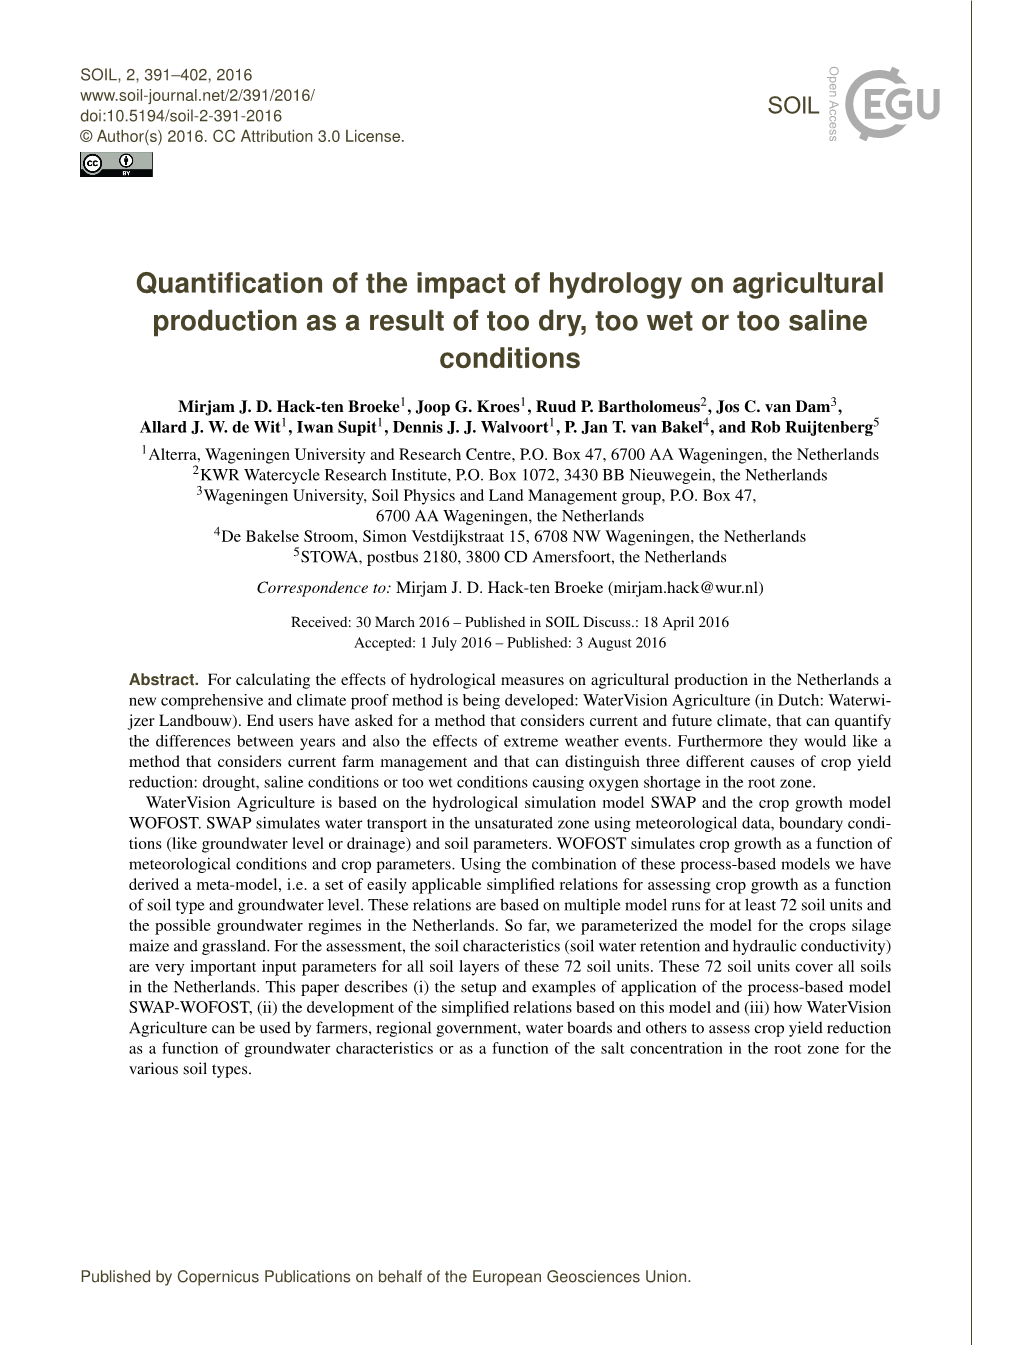 Quantification of the Impact of Hydrology on Agricultural